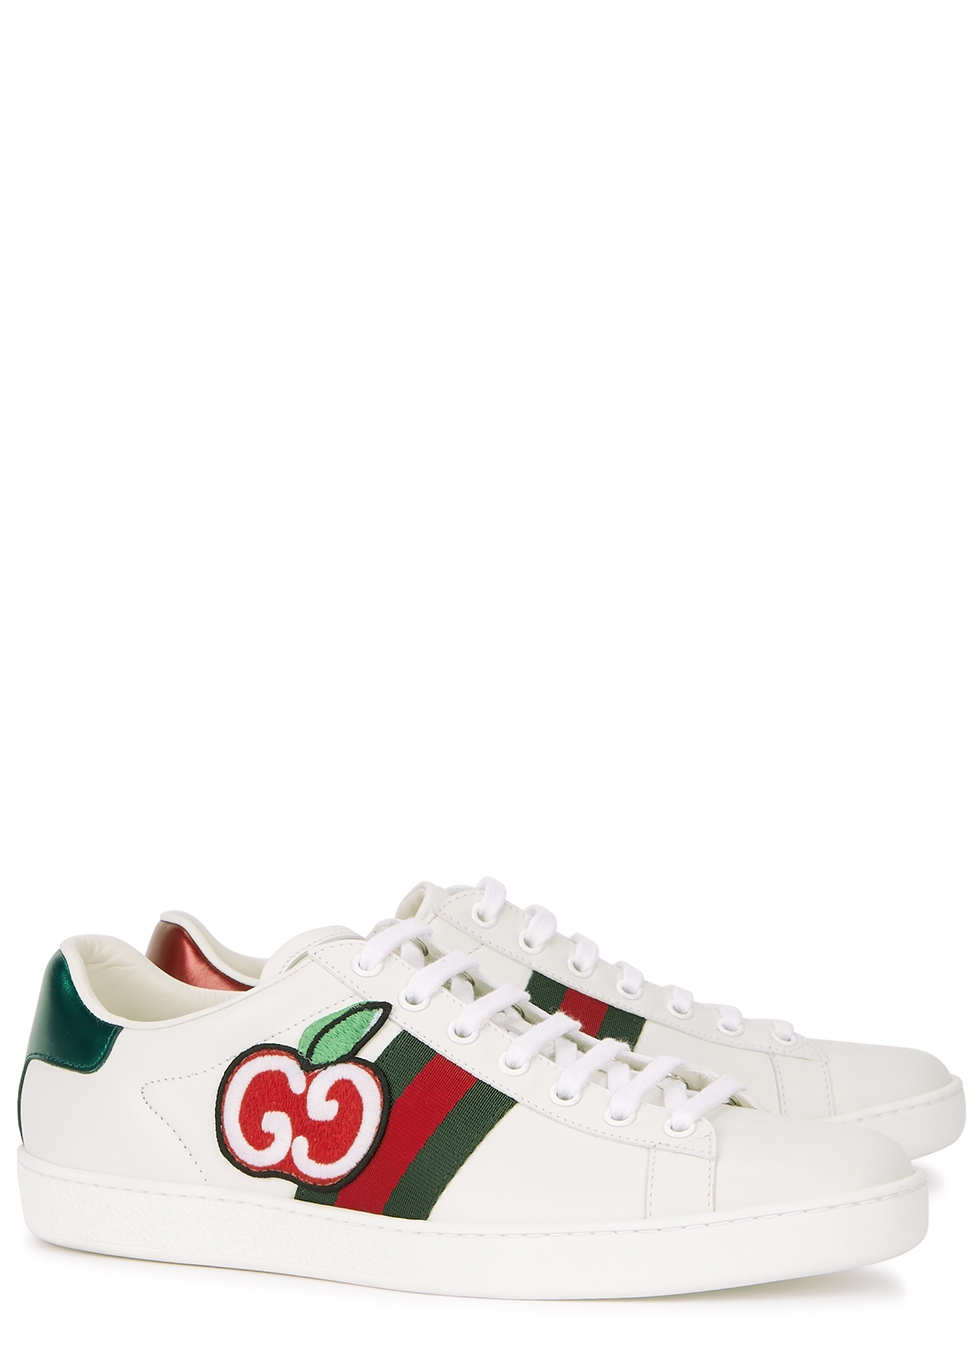 Gucci New Ace Heart Sneakers Top Sellers, 53% OFF | www 